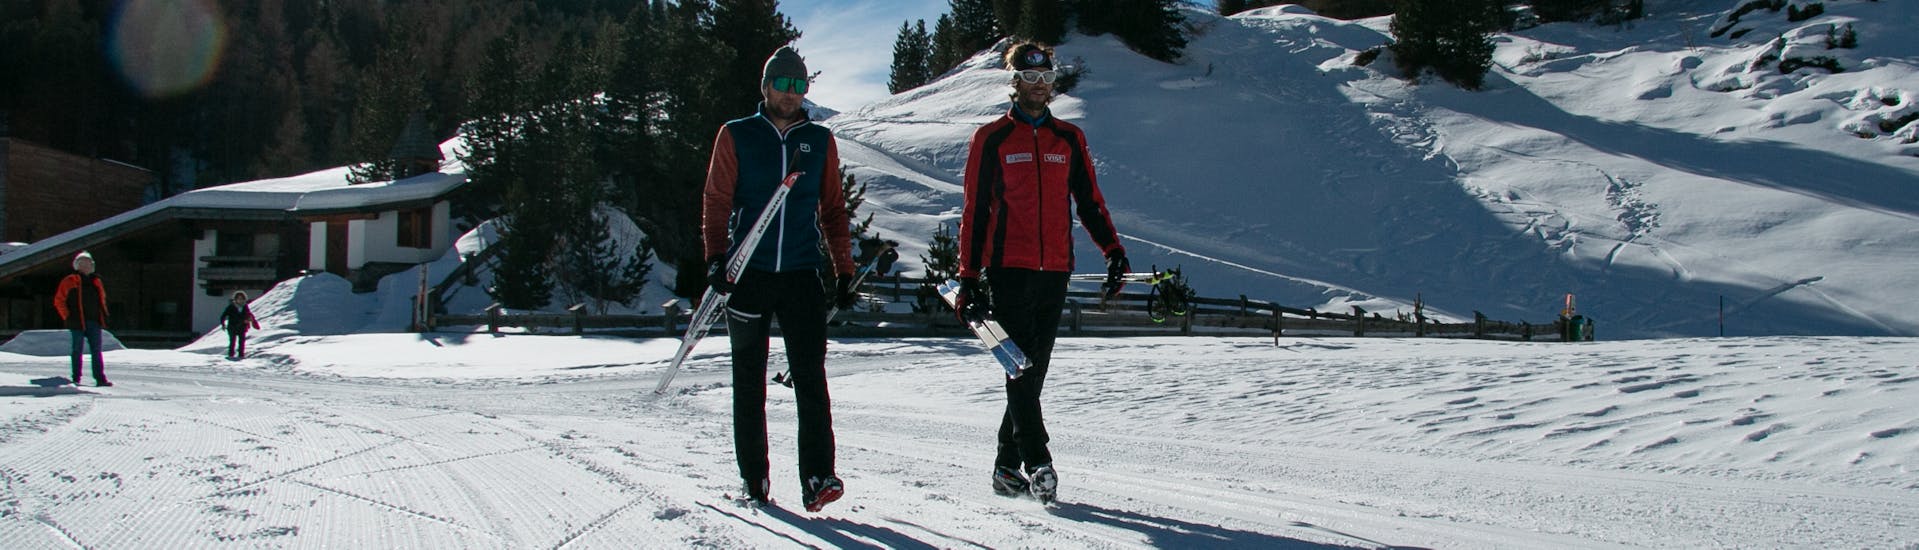 Two people skiing next to each other at Cross-Country Skiing Lessons for Beginners.